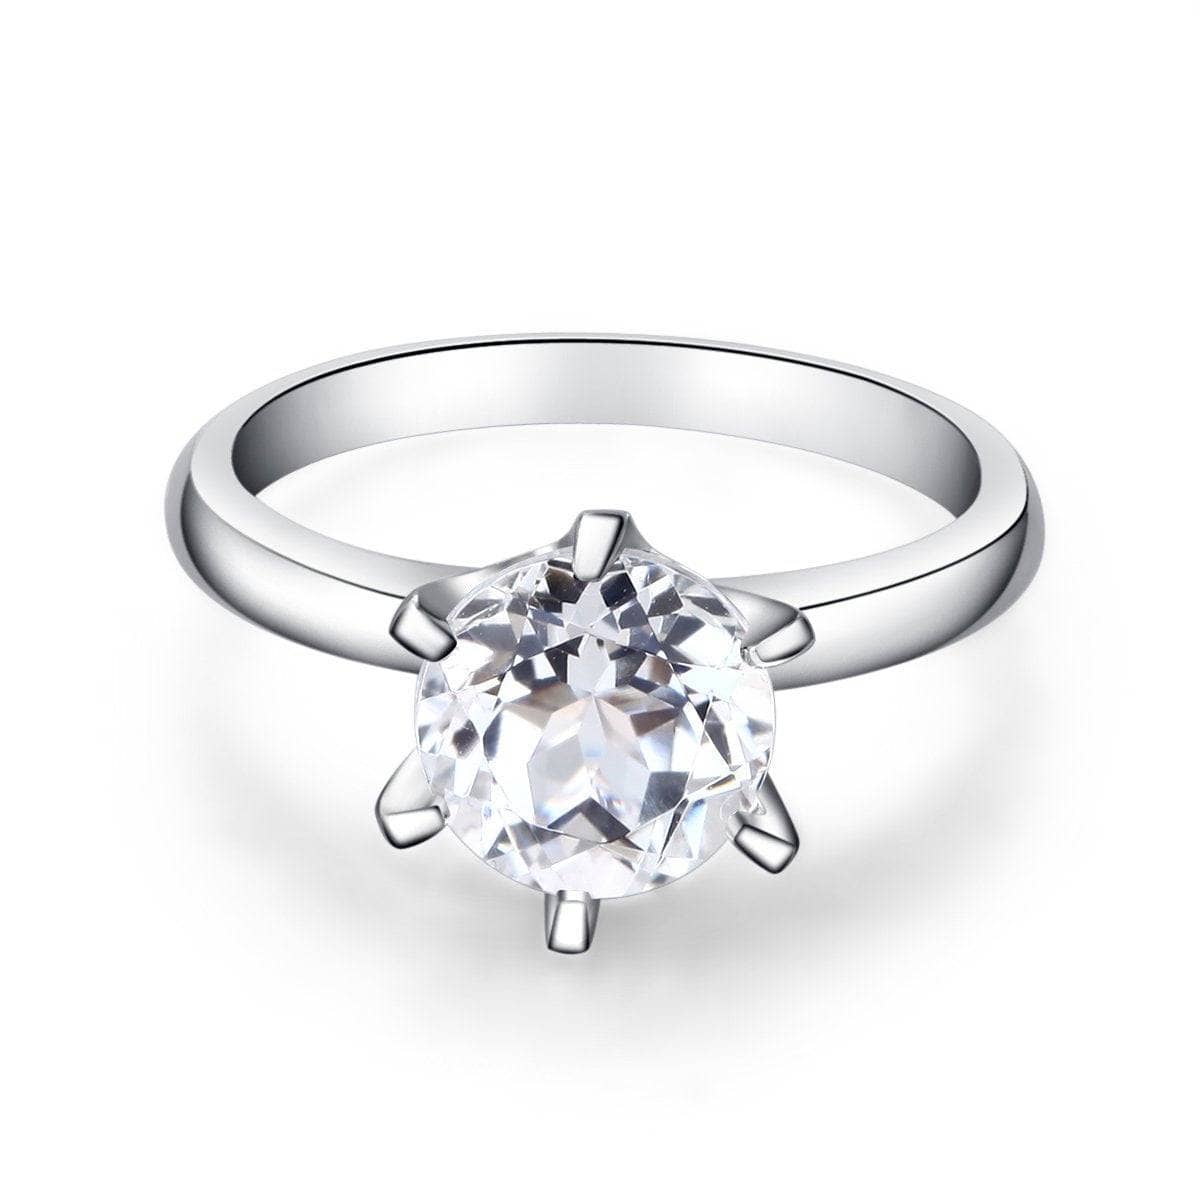 14K White Gold 2ct Topaz 6 Claws Solitaire Ring